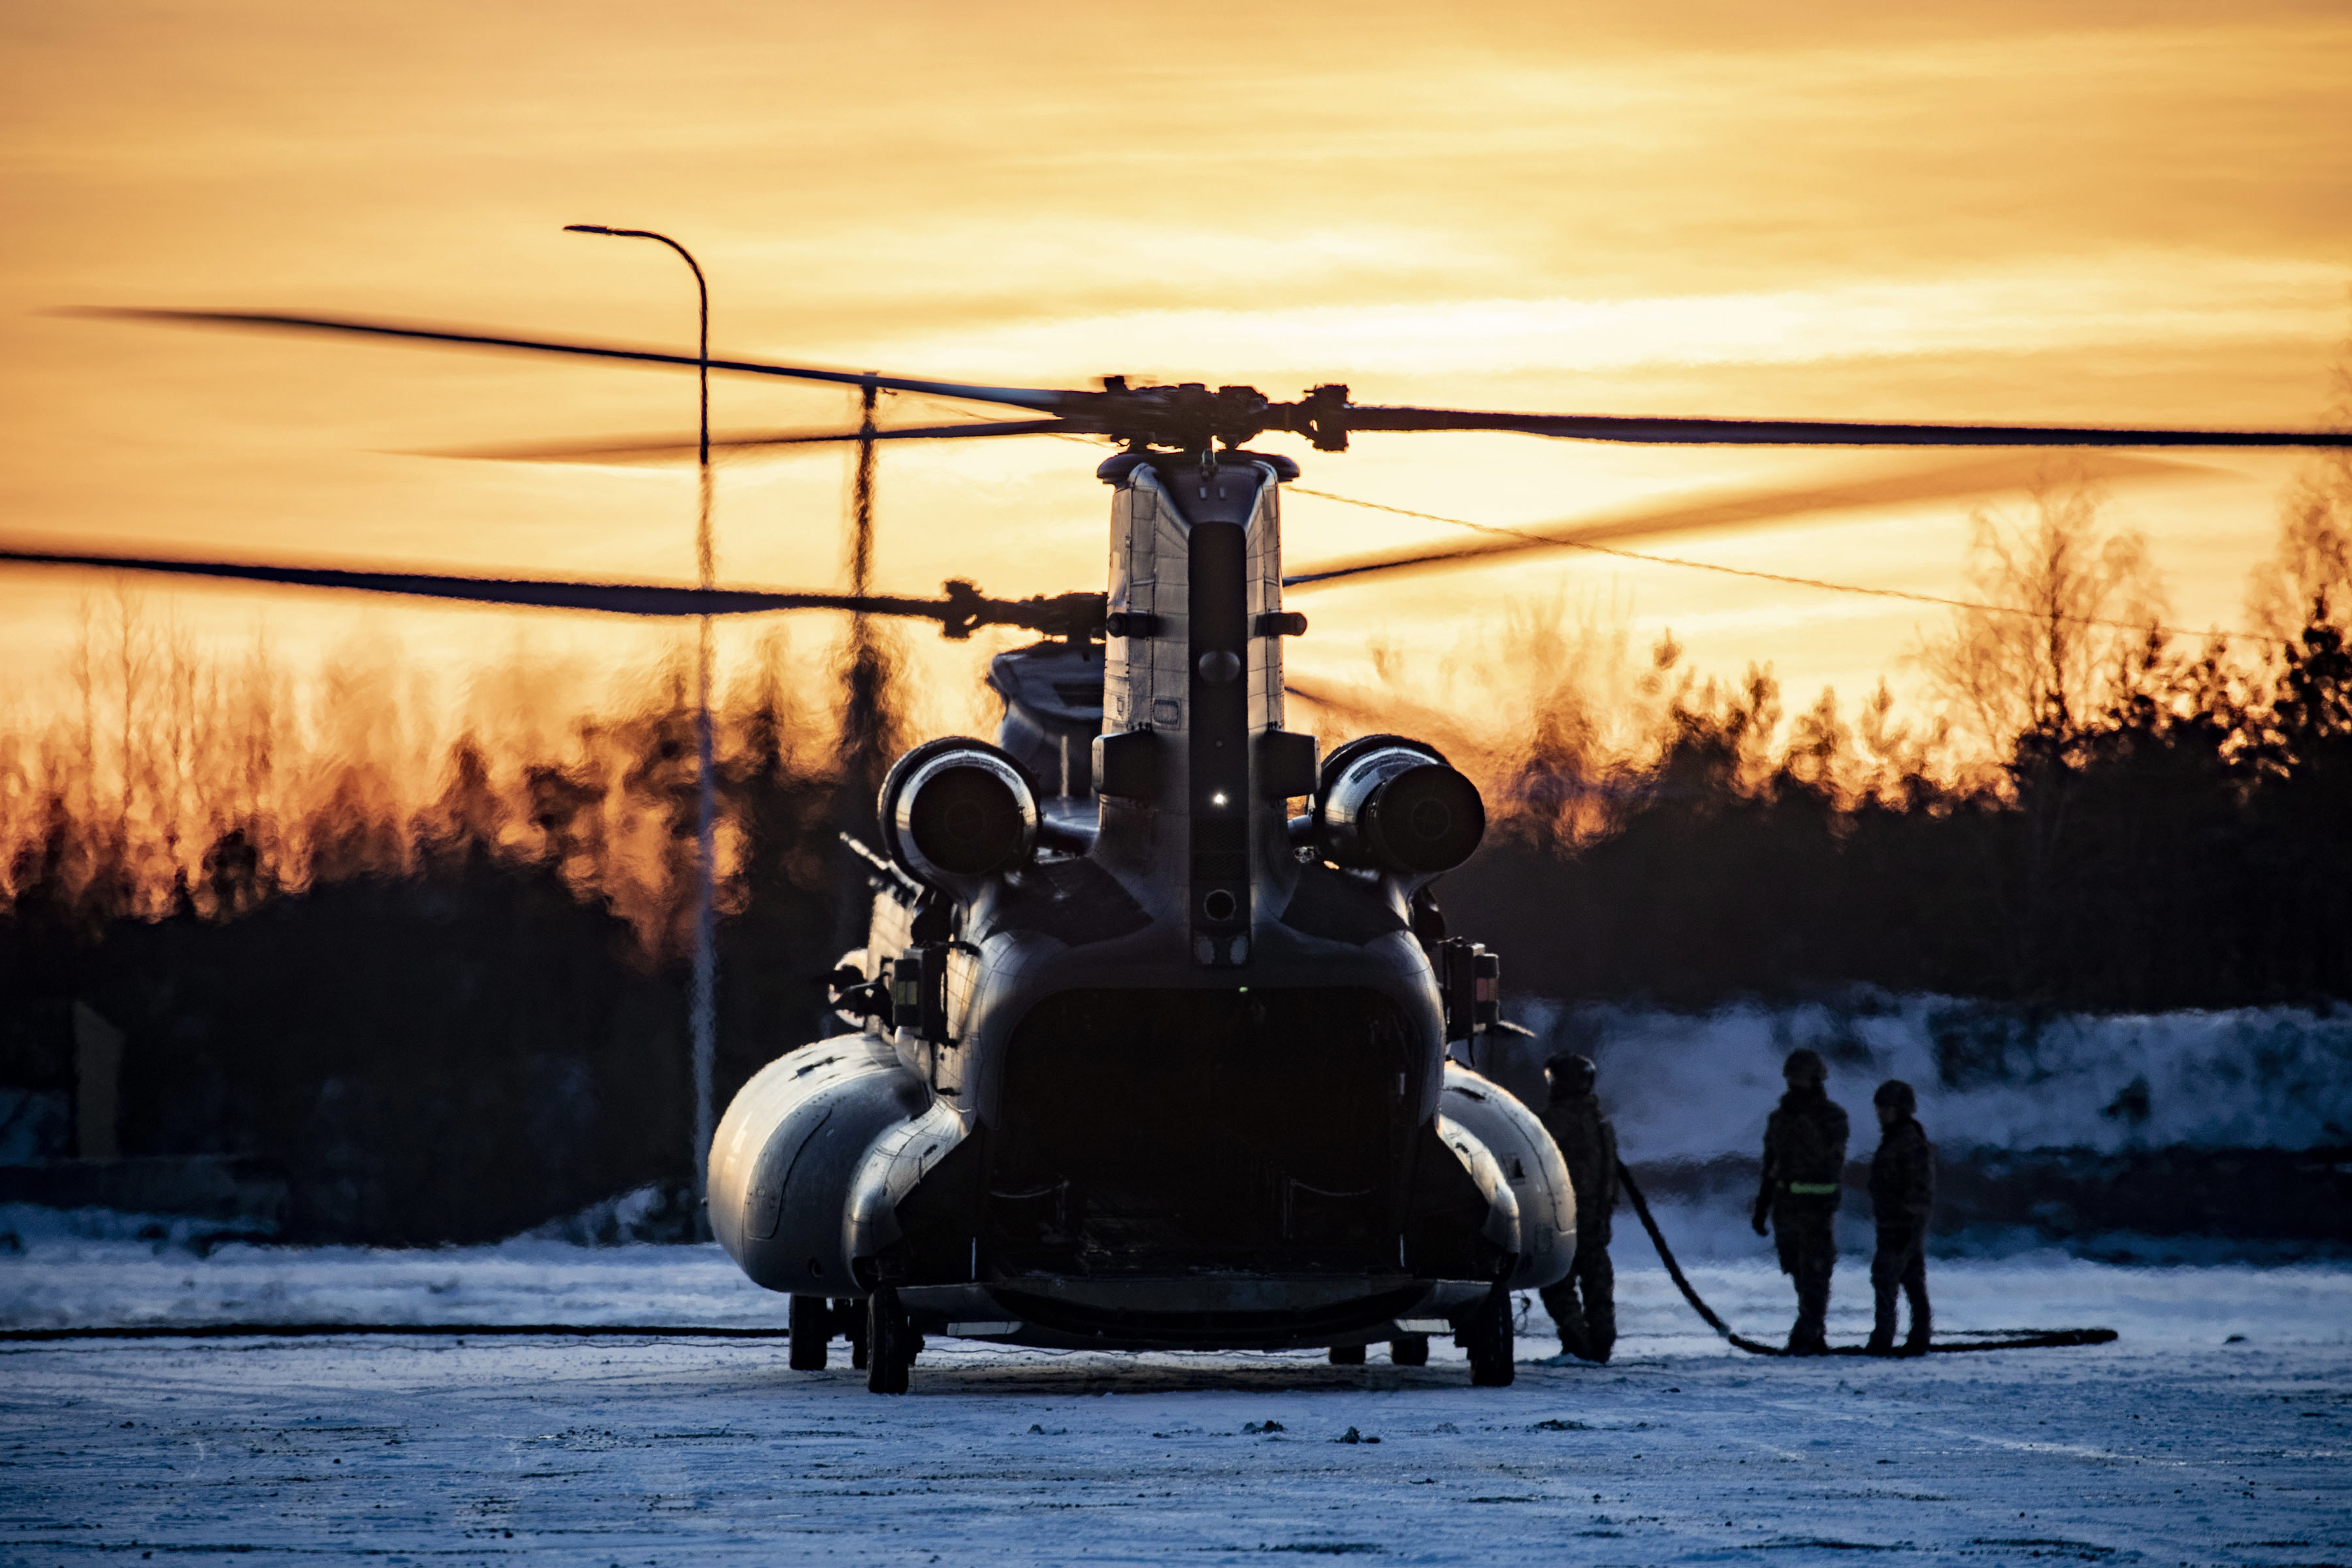 Image shows RAF Chinook on the airfield during sunset.